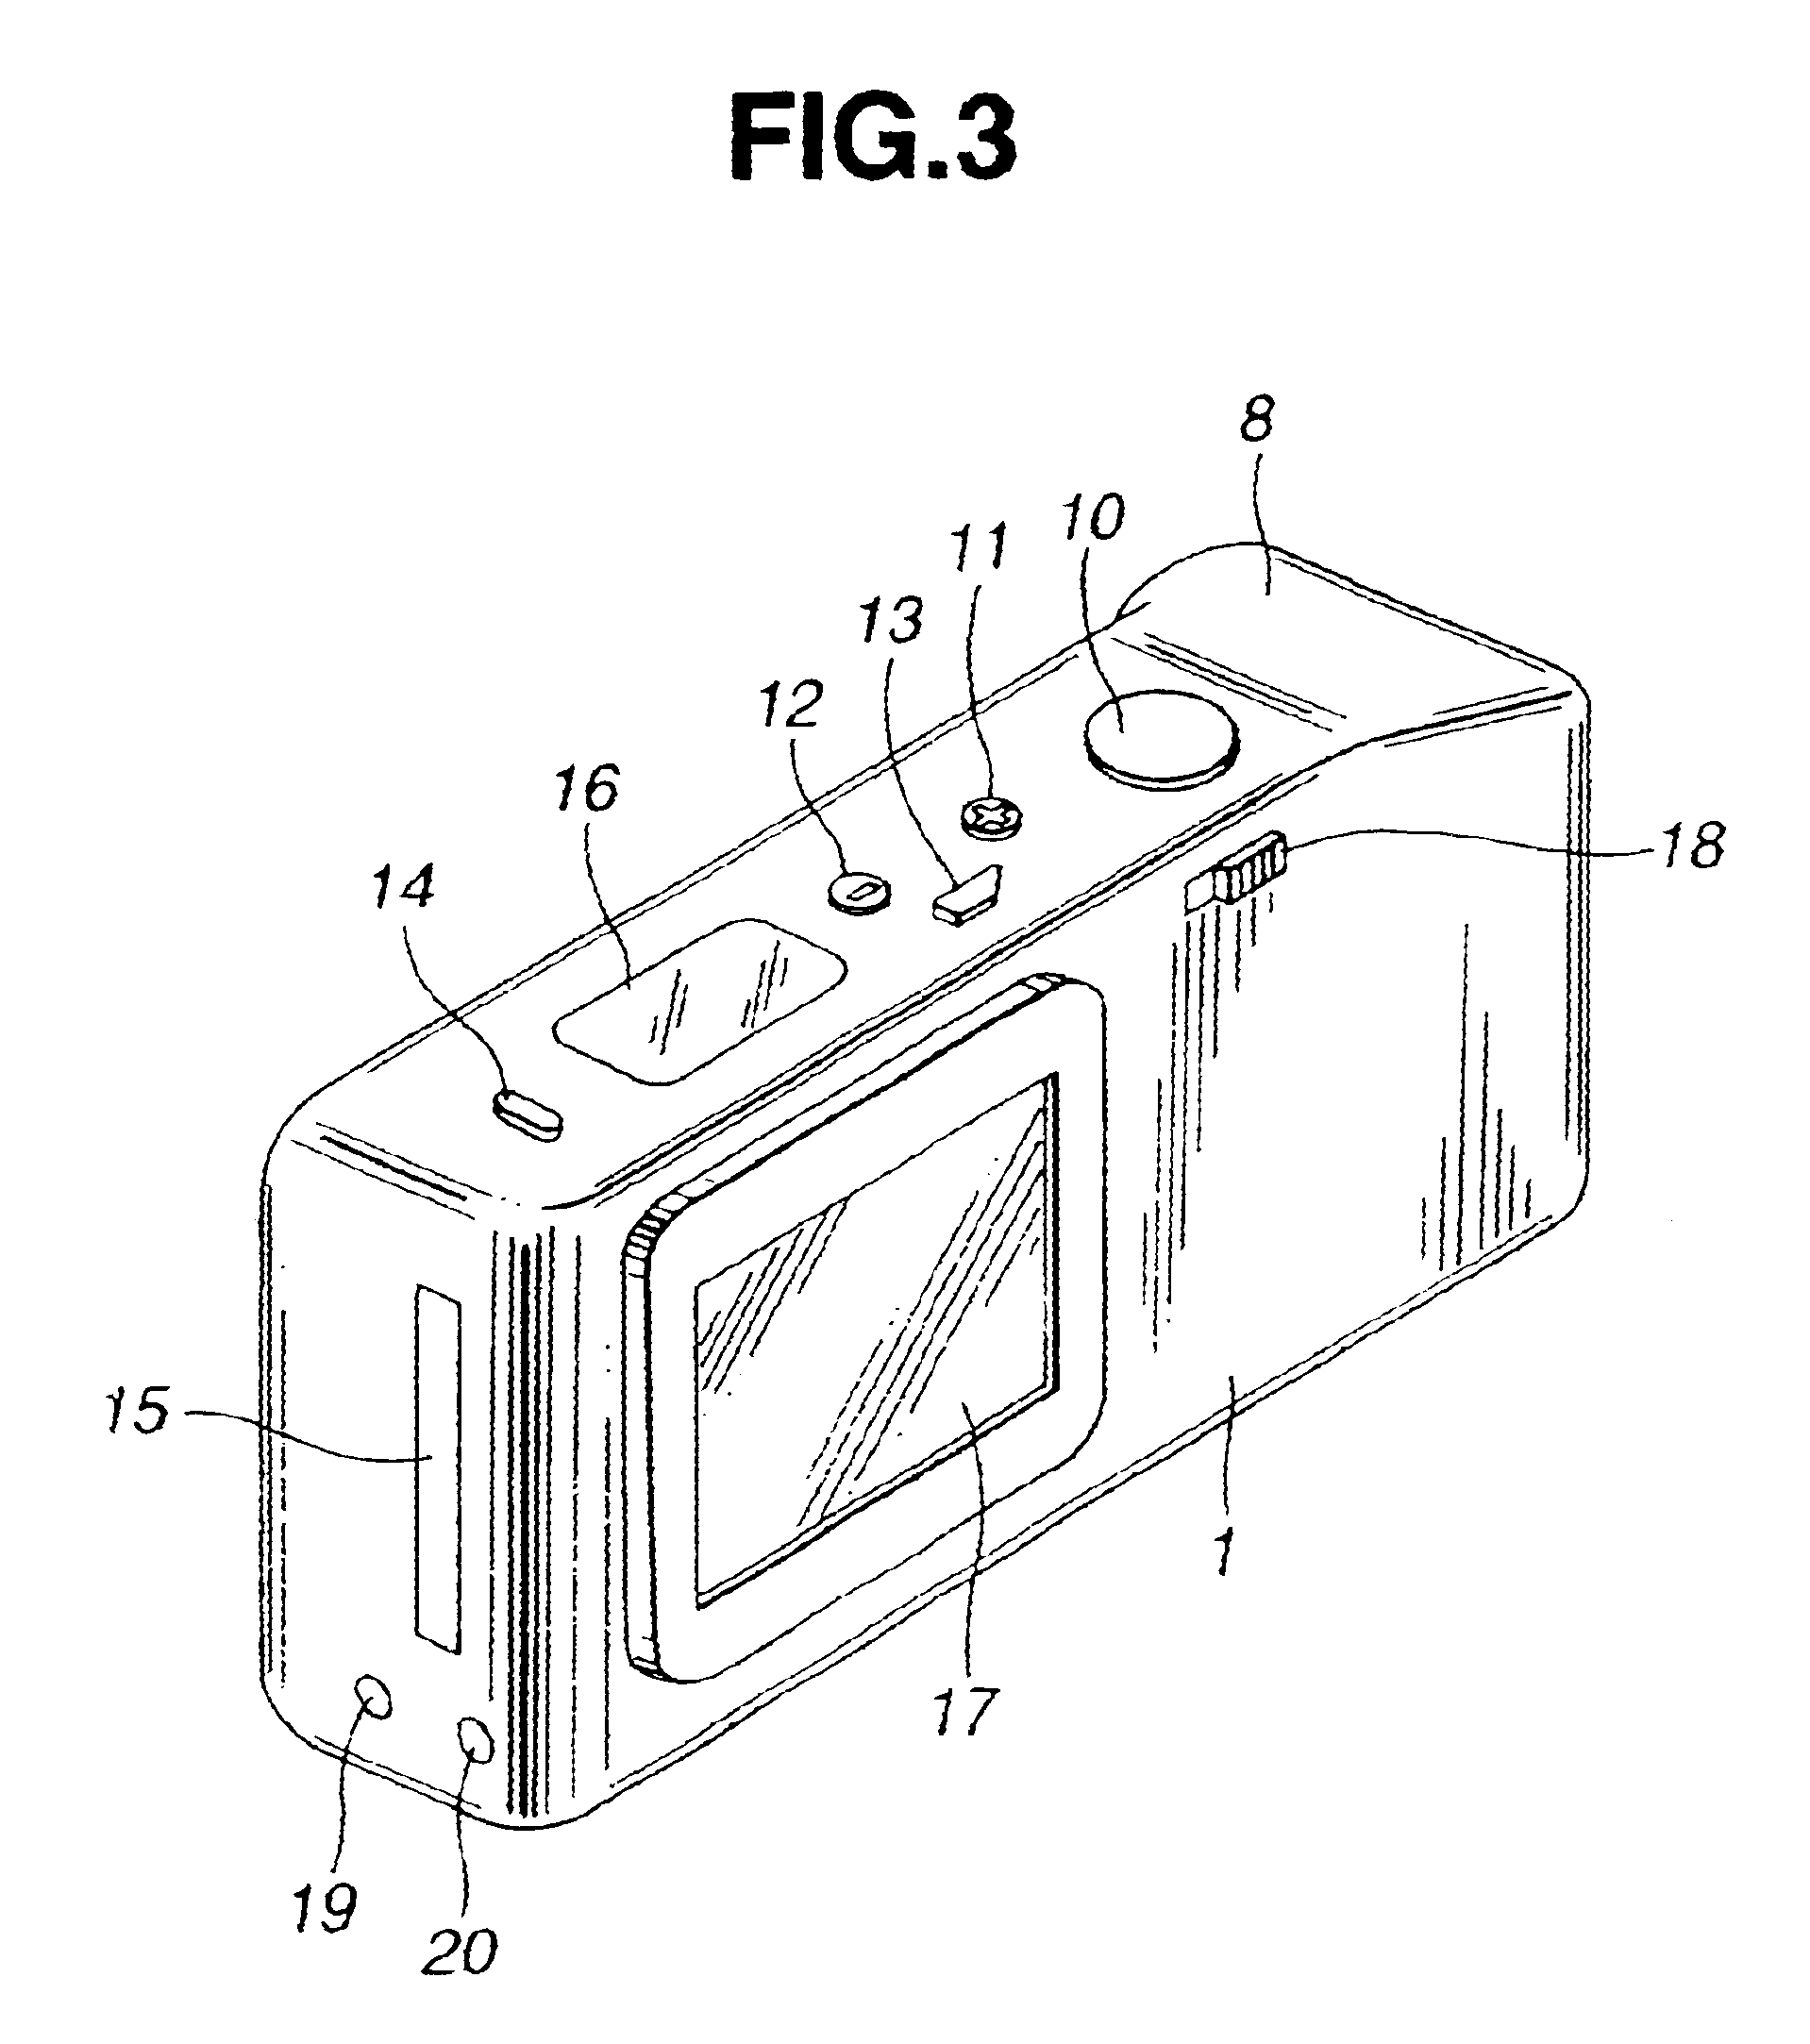 Electronic photographing device for panoramic photographing and editing